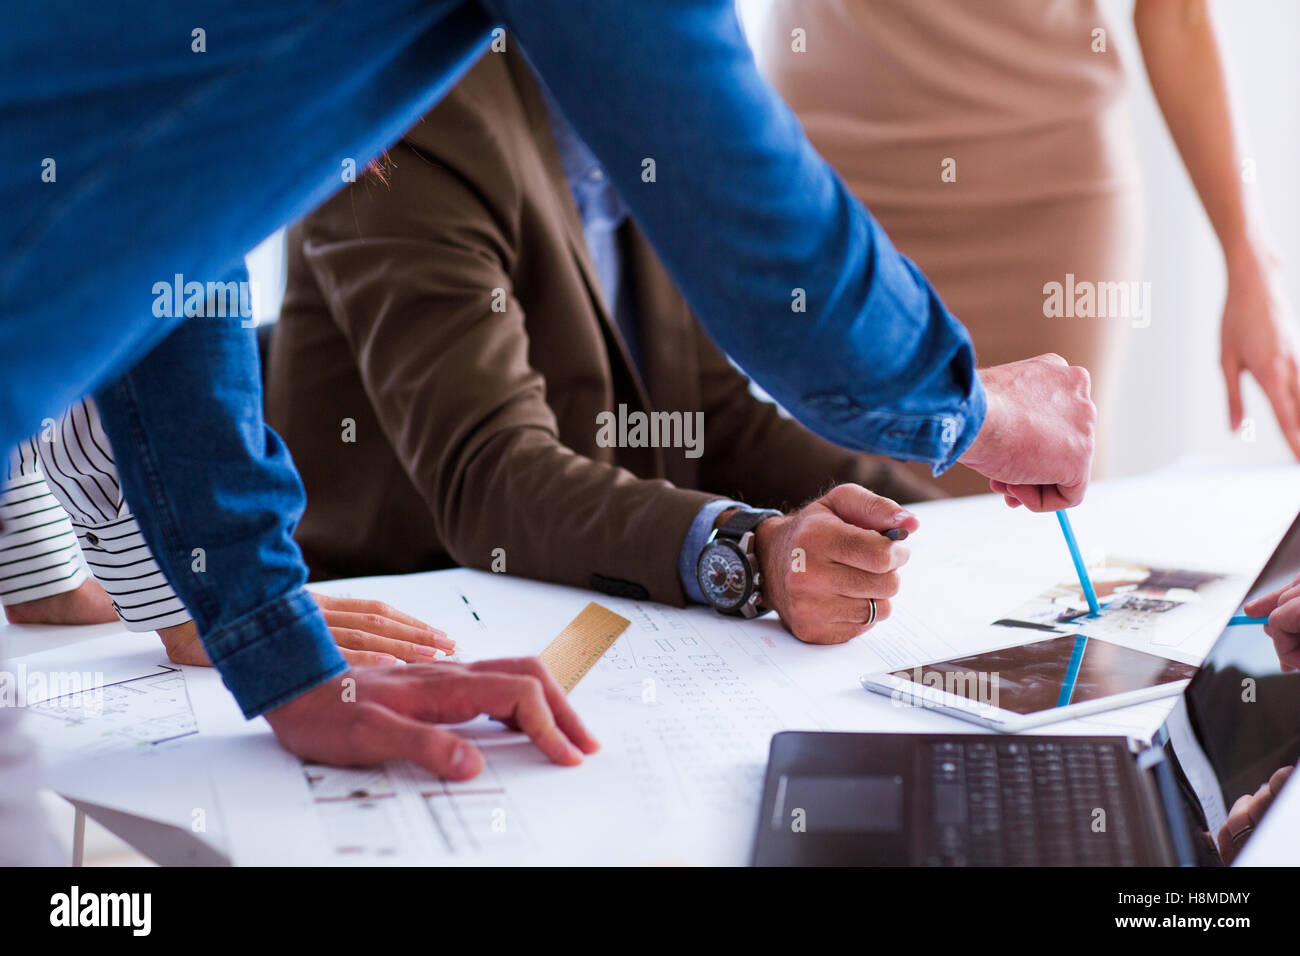 Men and women working in office Stock Photo